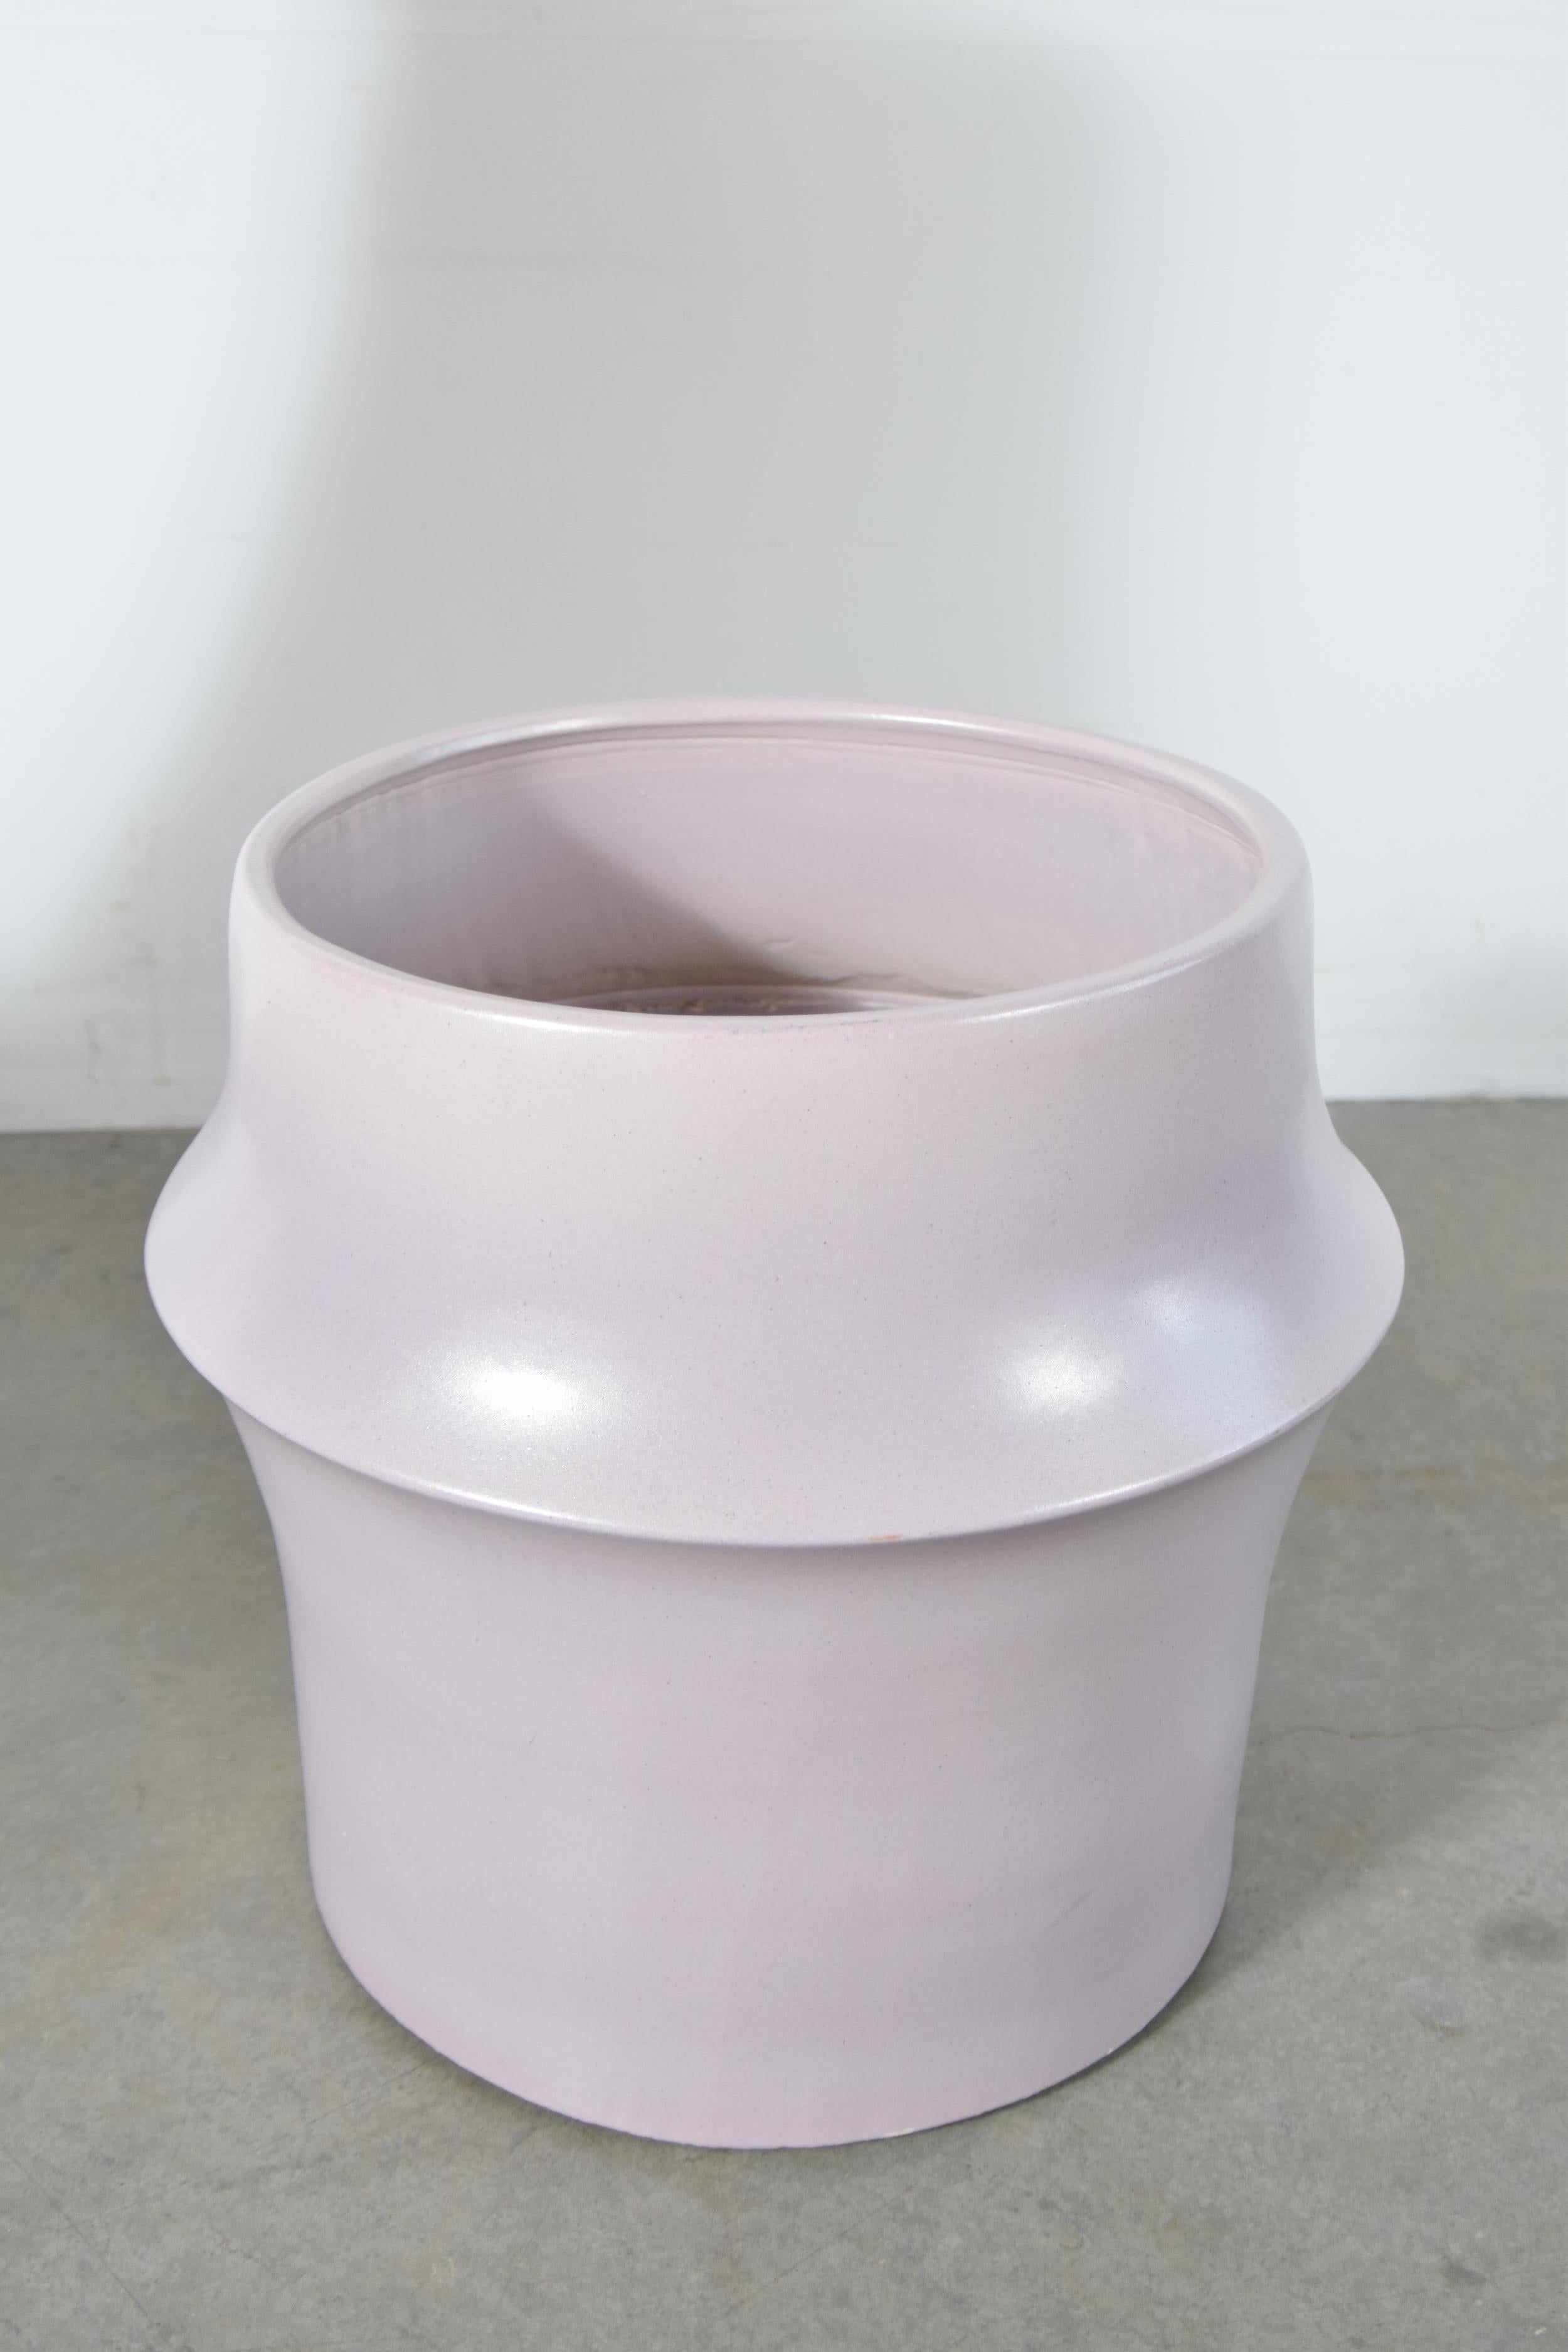 Glazed Large and Unusual Architectural Pottery Planter by Marilyn Kay Austin